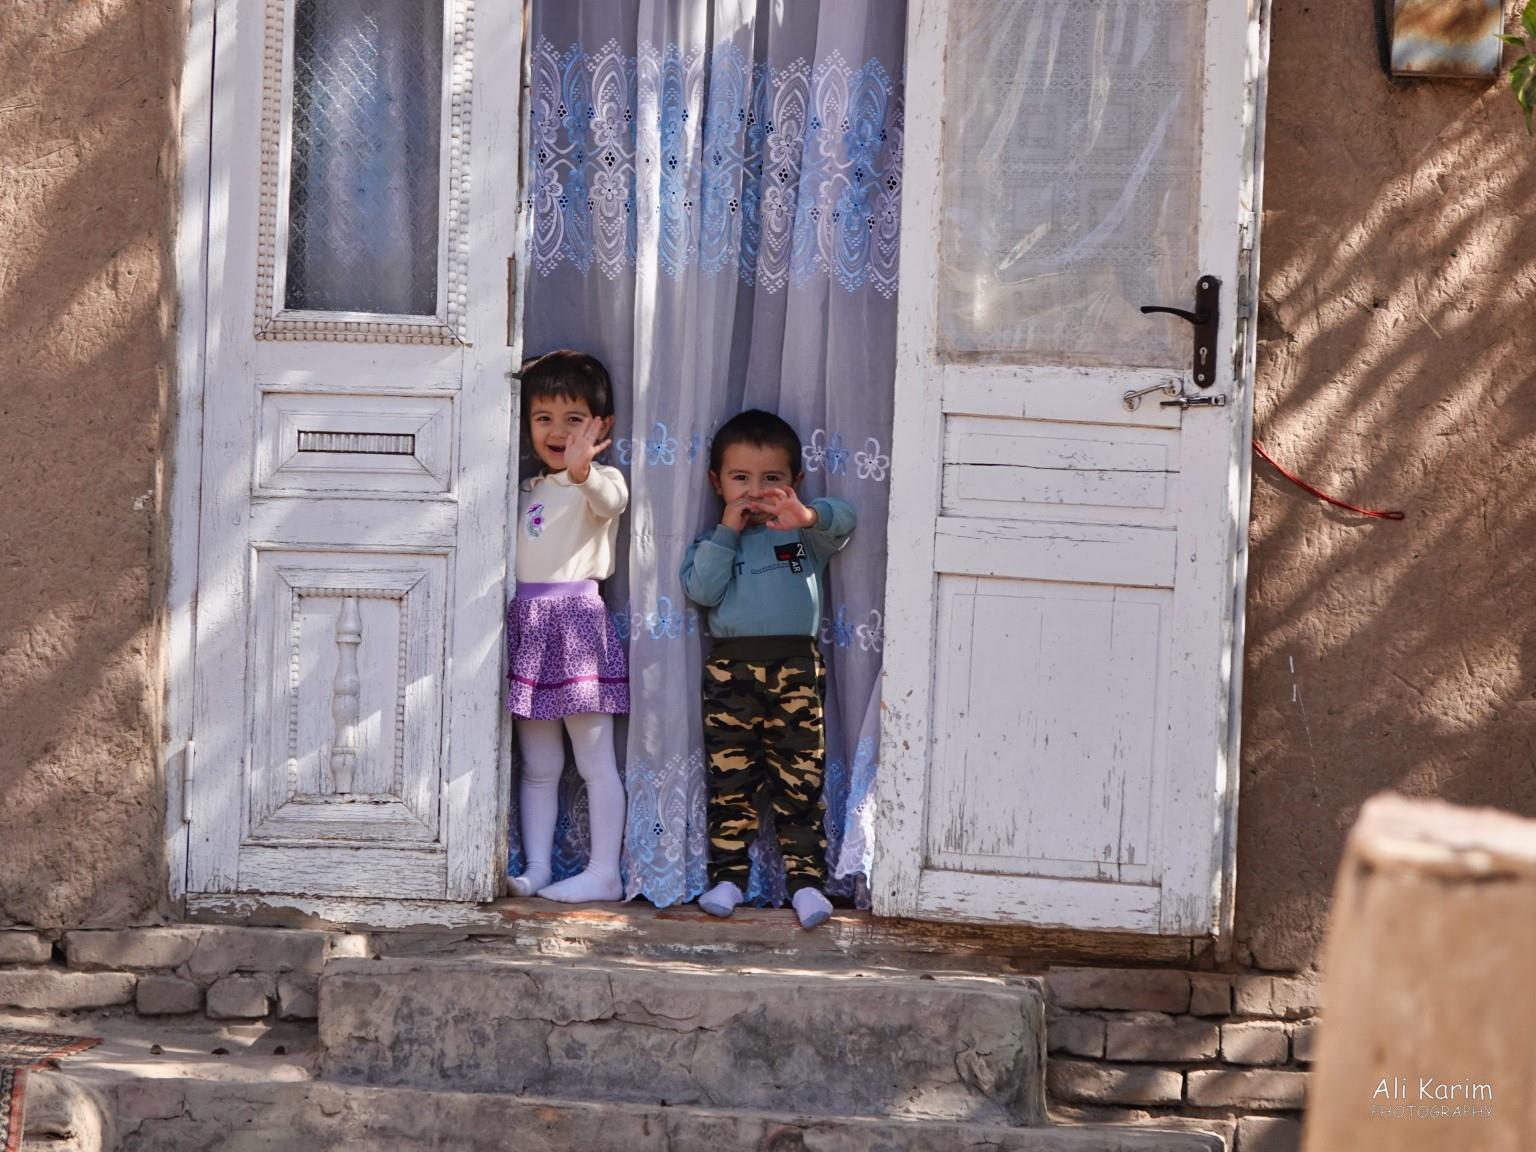 Khiva, Oct 2019, Universal hello-waves from young ones at a local residence